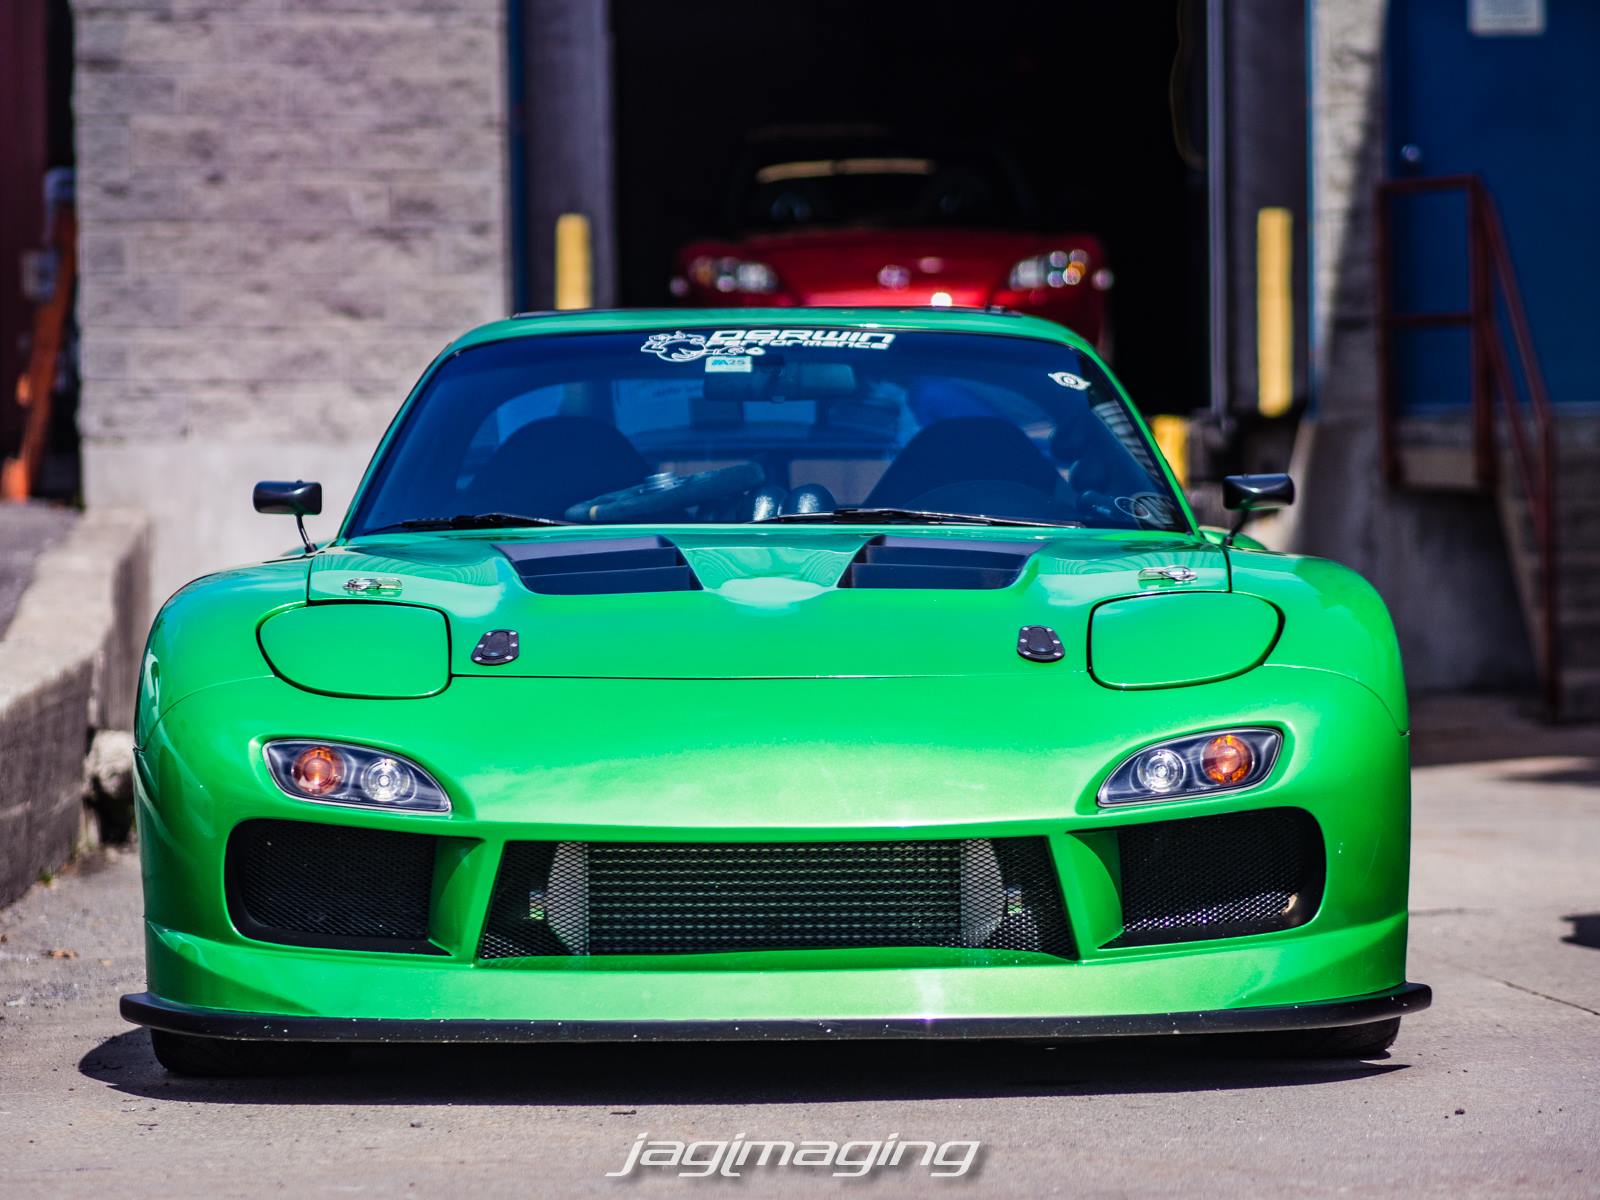 RX7 FD 1994 synergy green Twin turbo 429whp. 